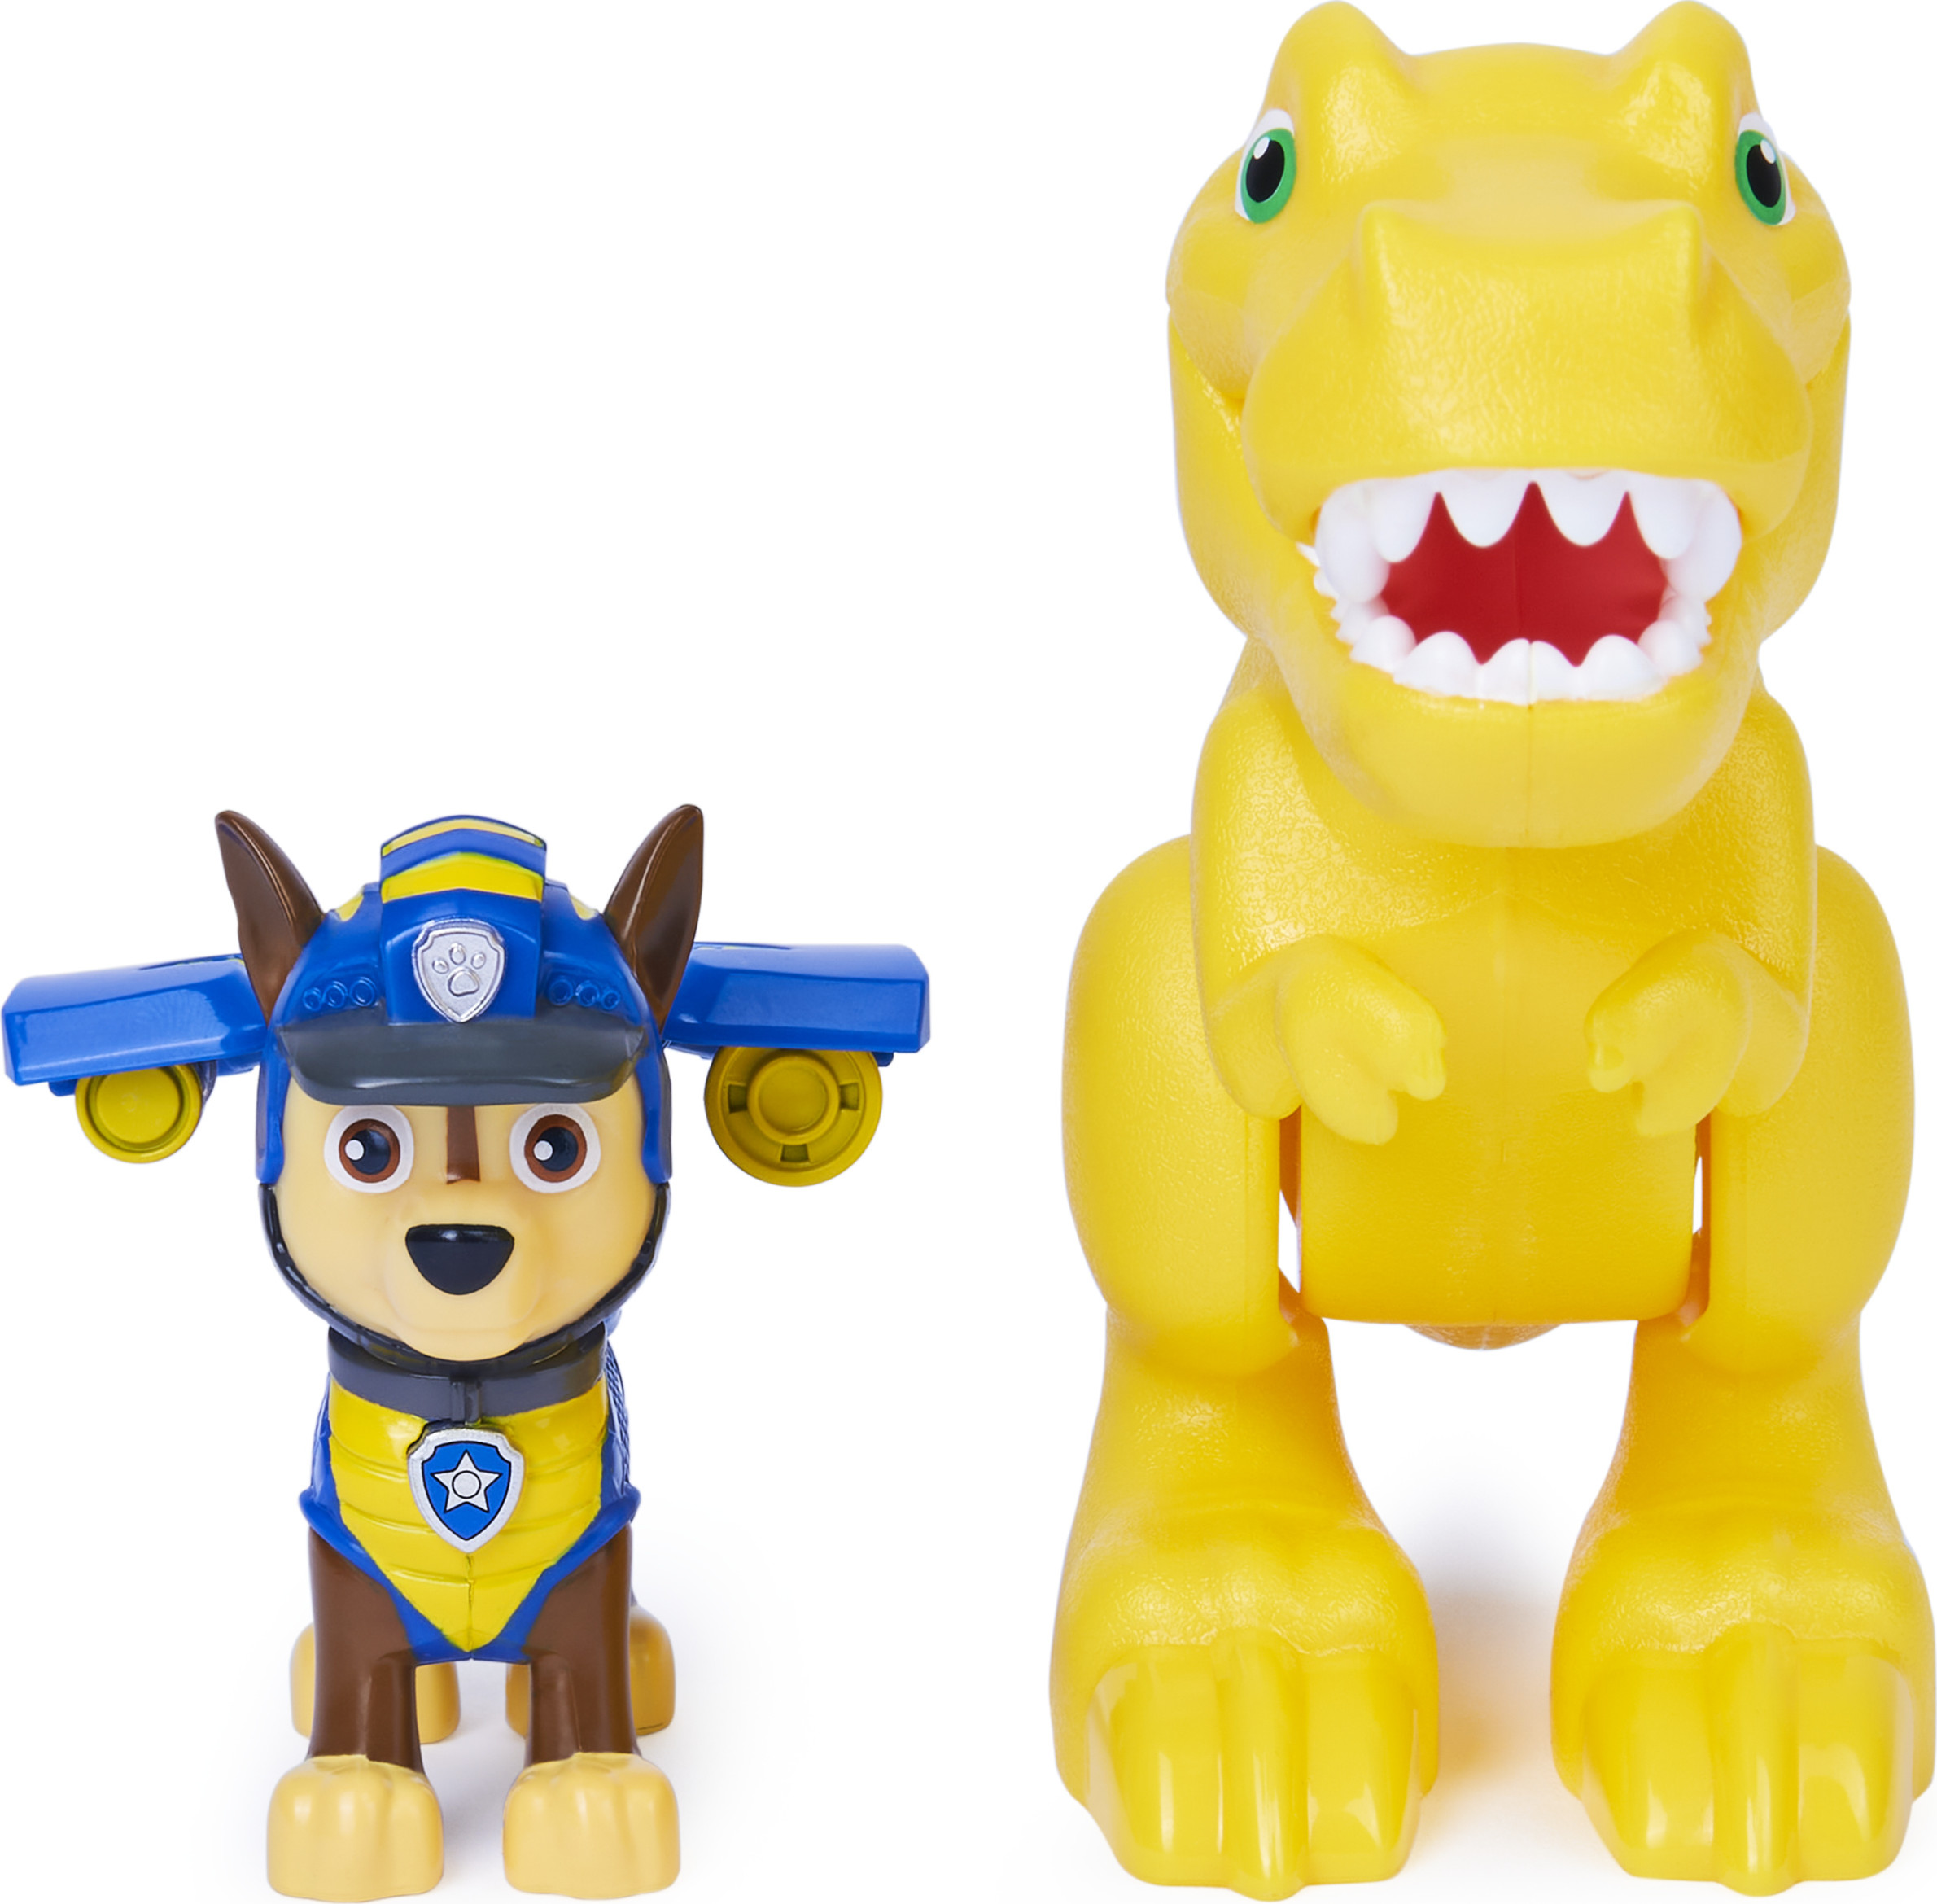 PAW Patrol, Dino Rescue Chase and Dinosaur Action Figure Set, for Kids Aged 3 and up - image 3 of 5